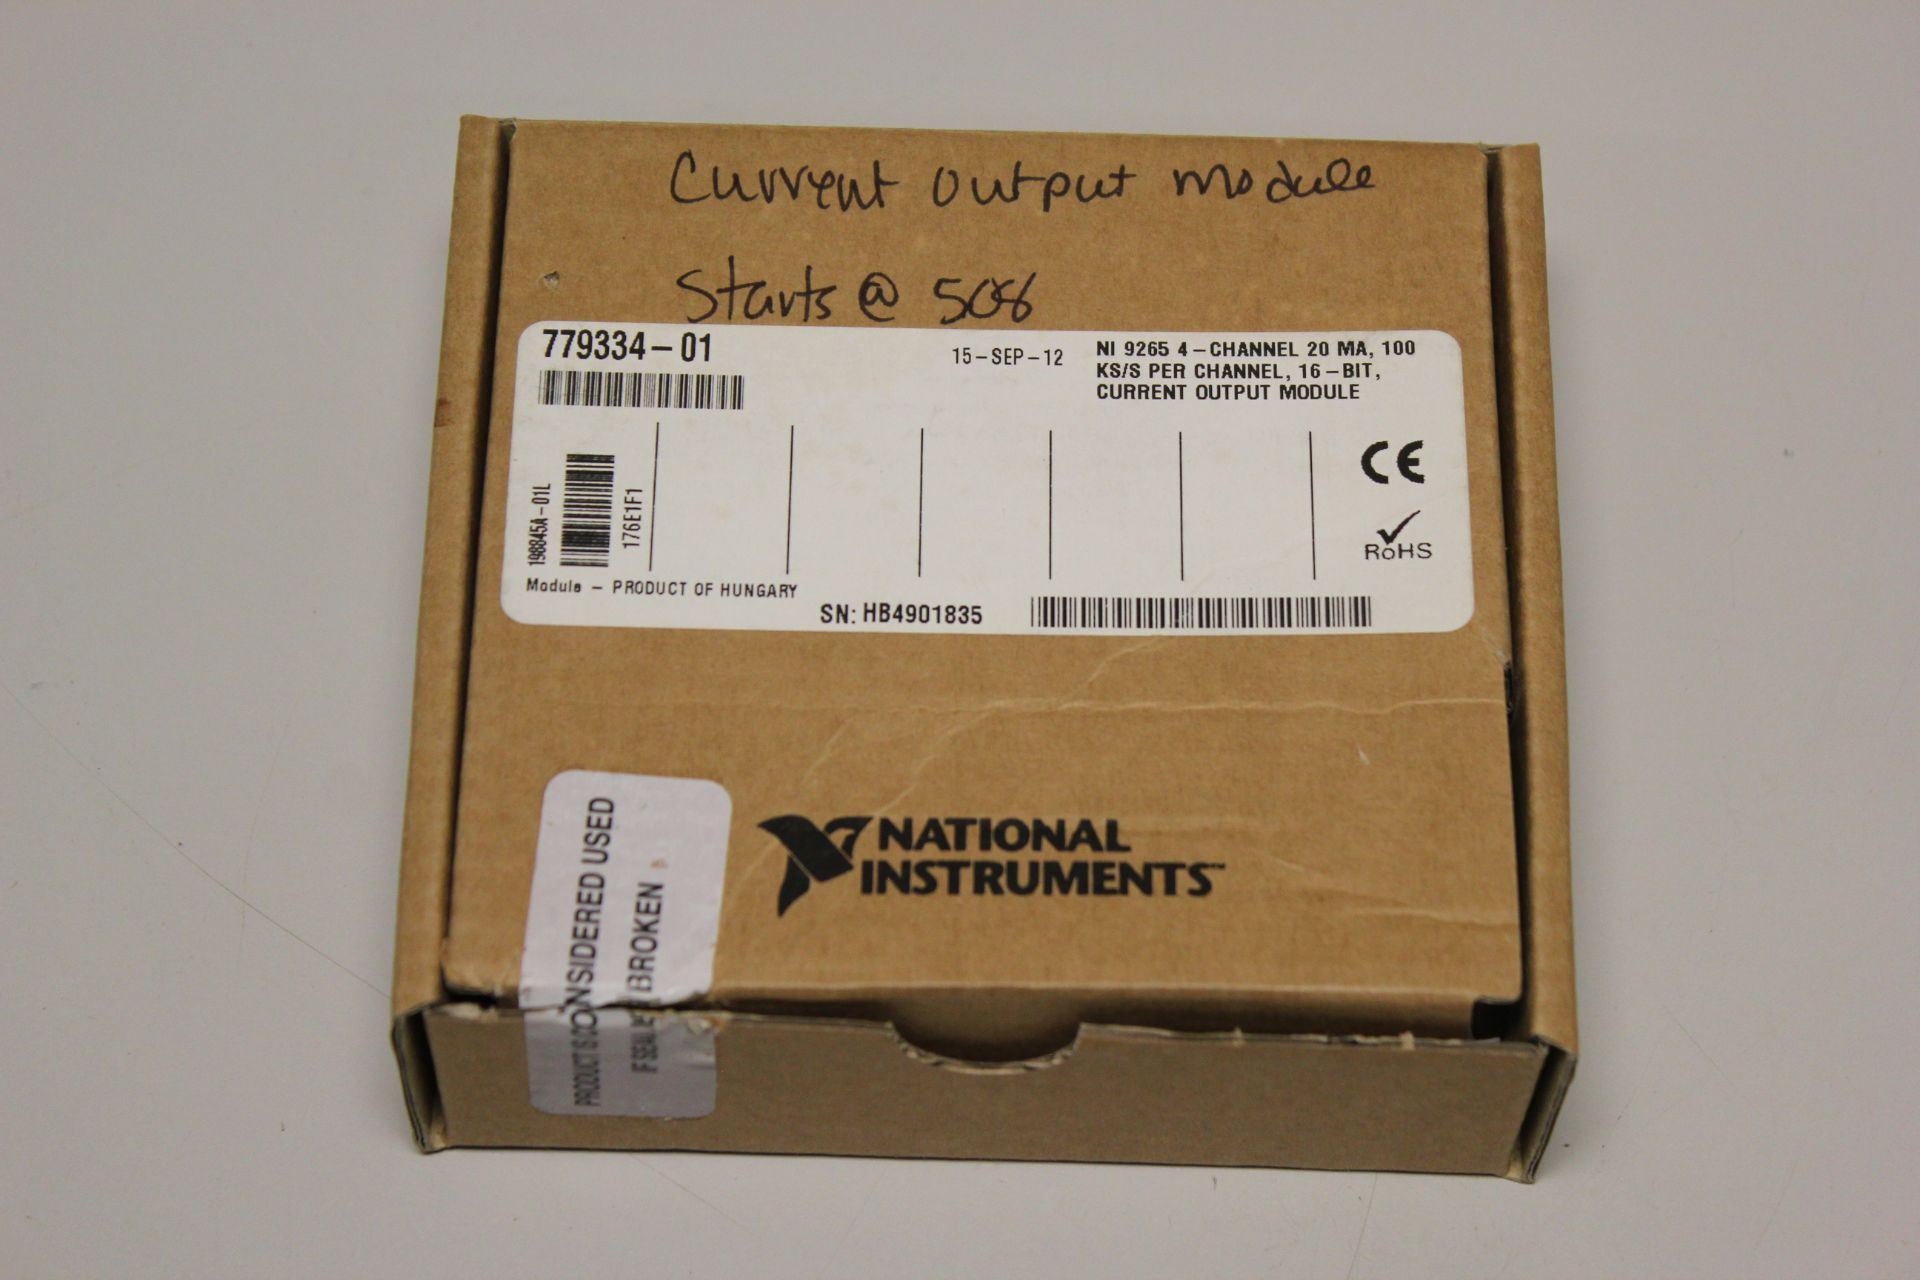 NEW NATIONAL INSTRUMENTS 9265 4-CHANNEL CURRENT OUTPUT MODULE